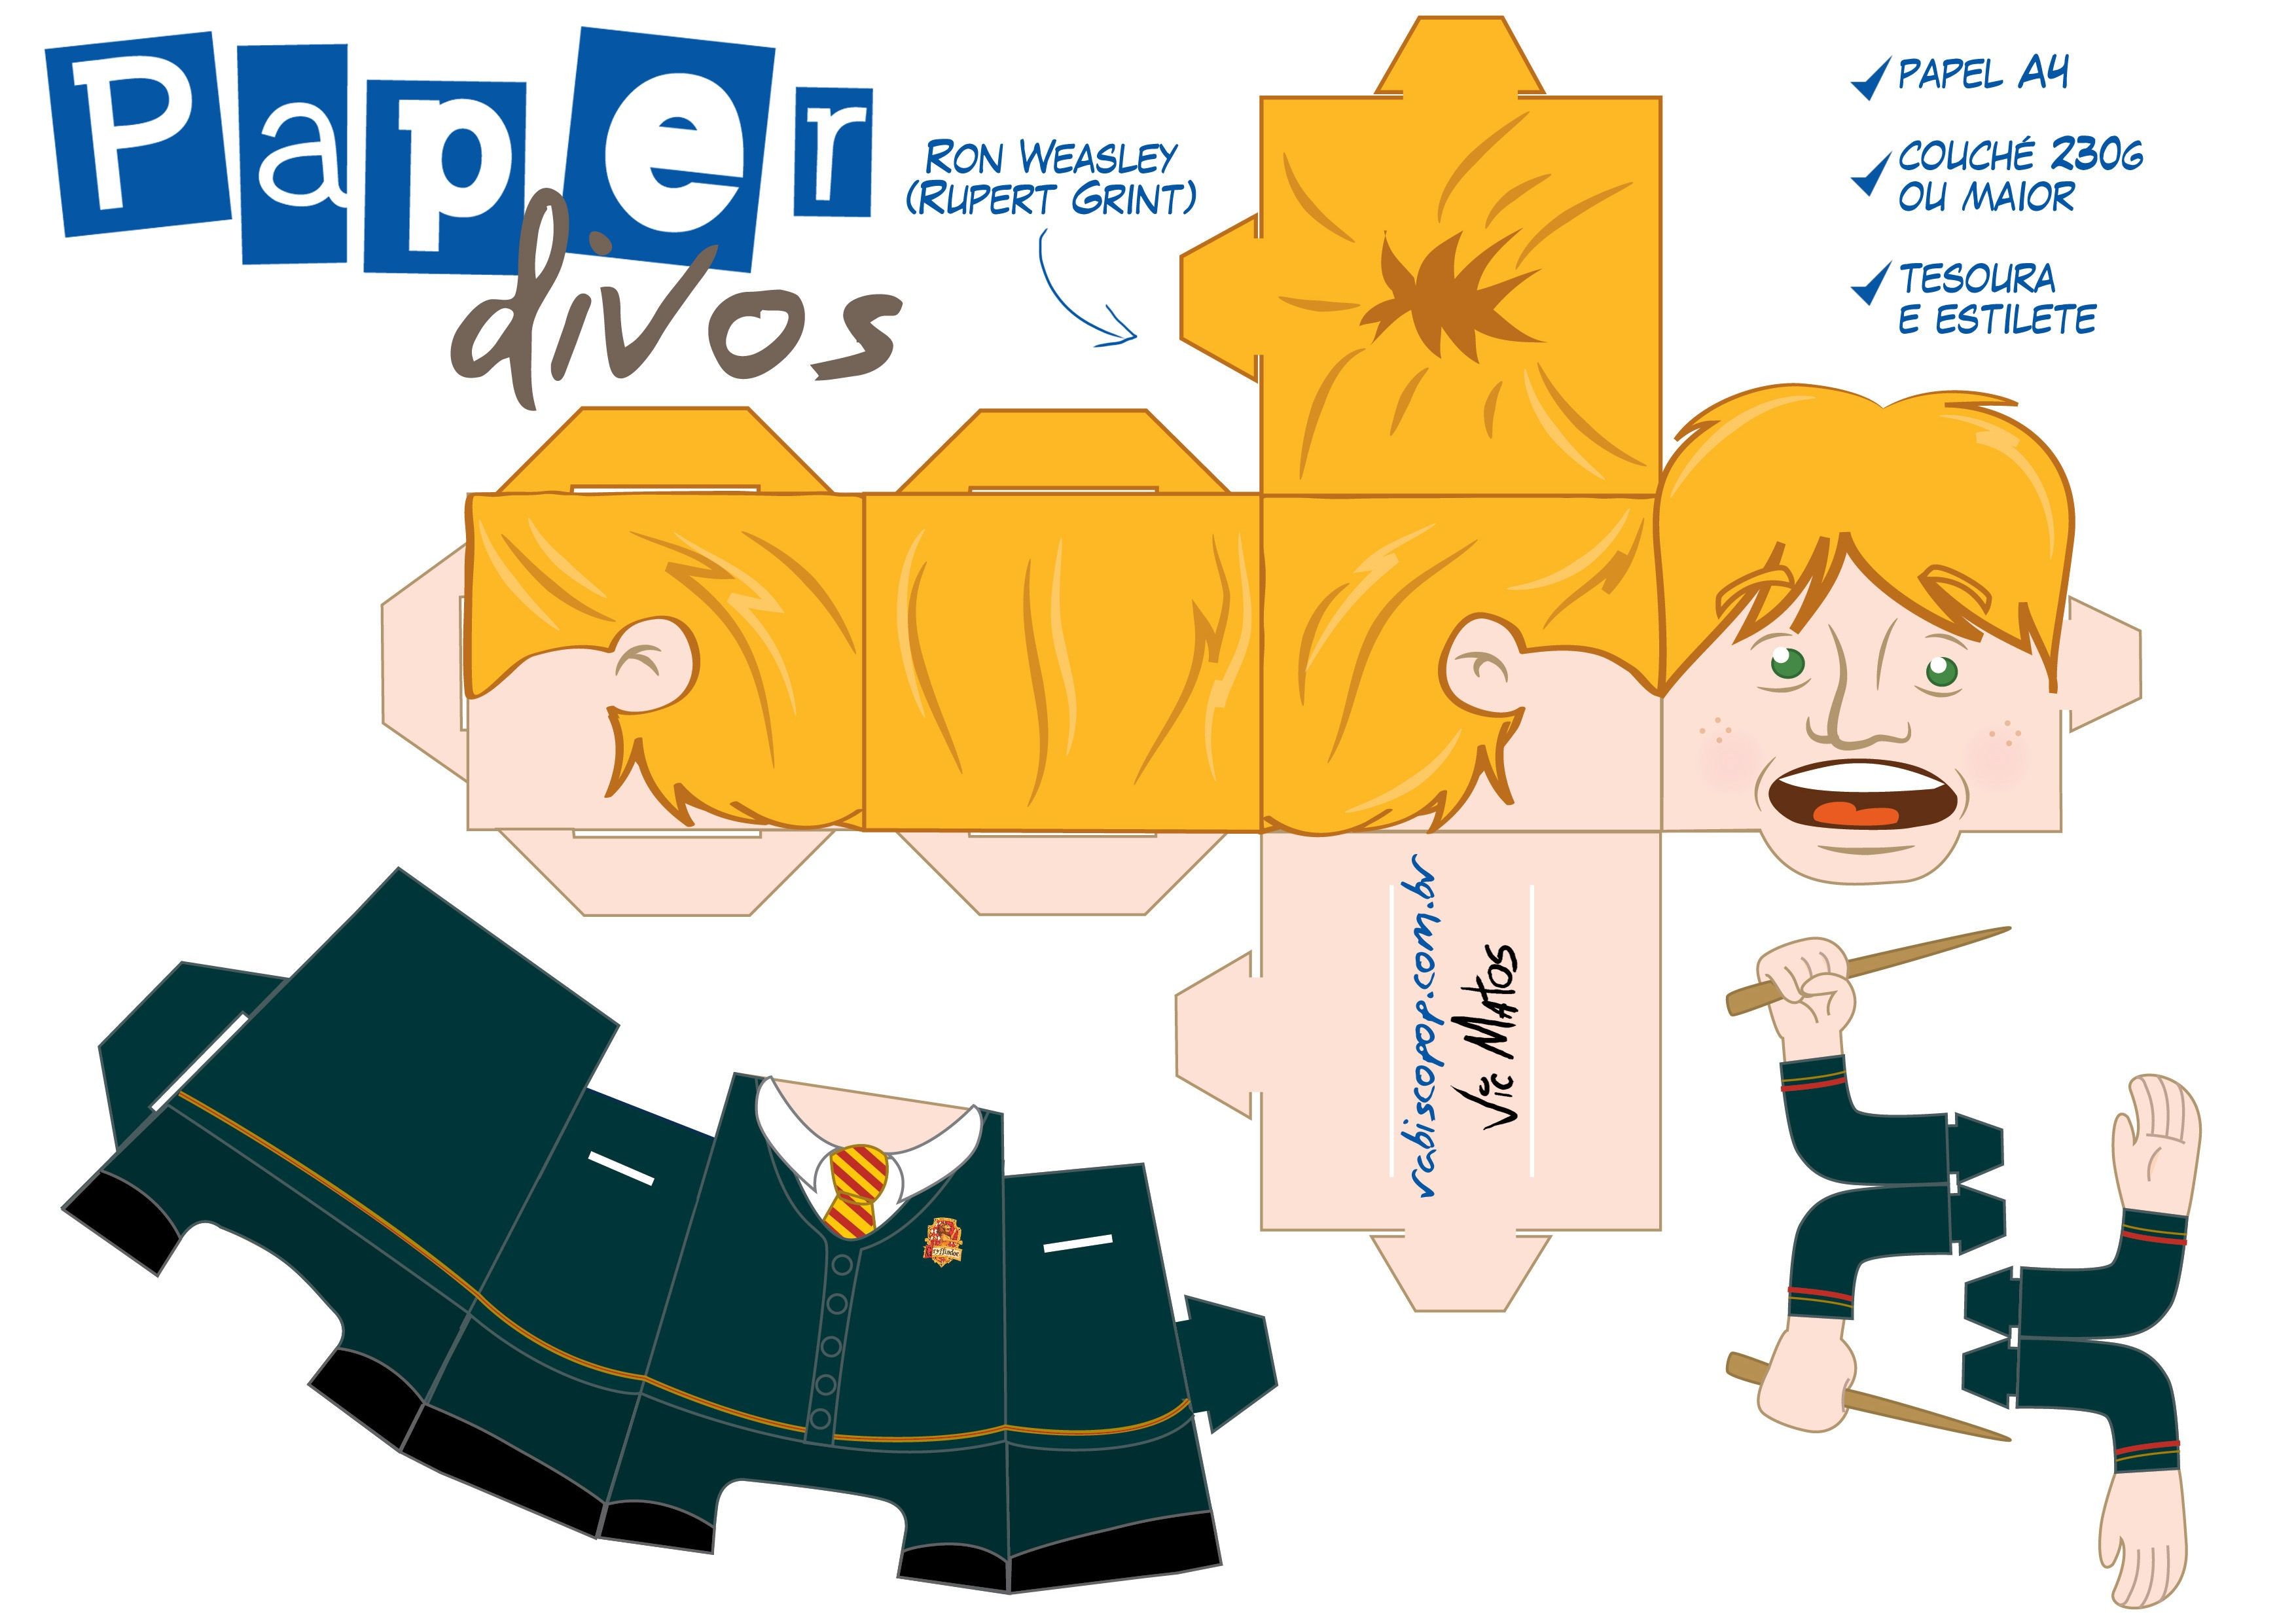 Harry Potter Papercraft Ron Weasley Content 2011 08